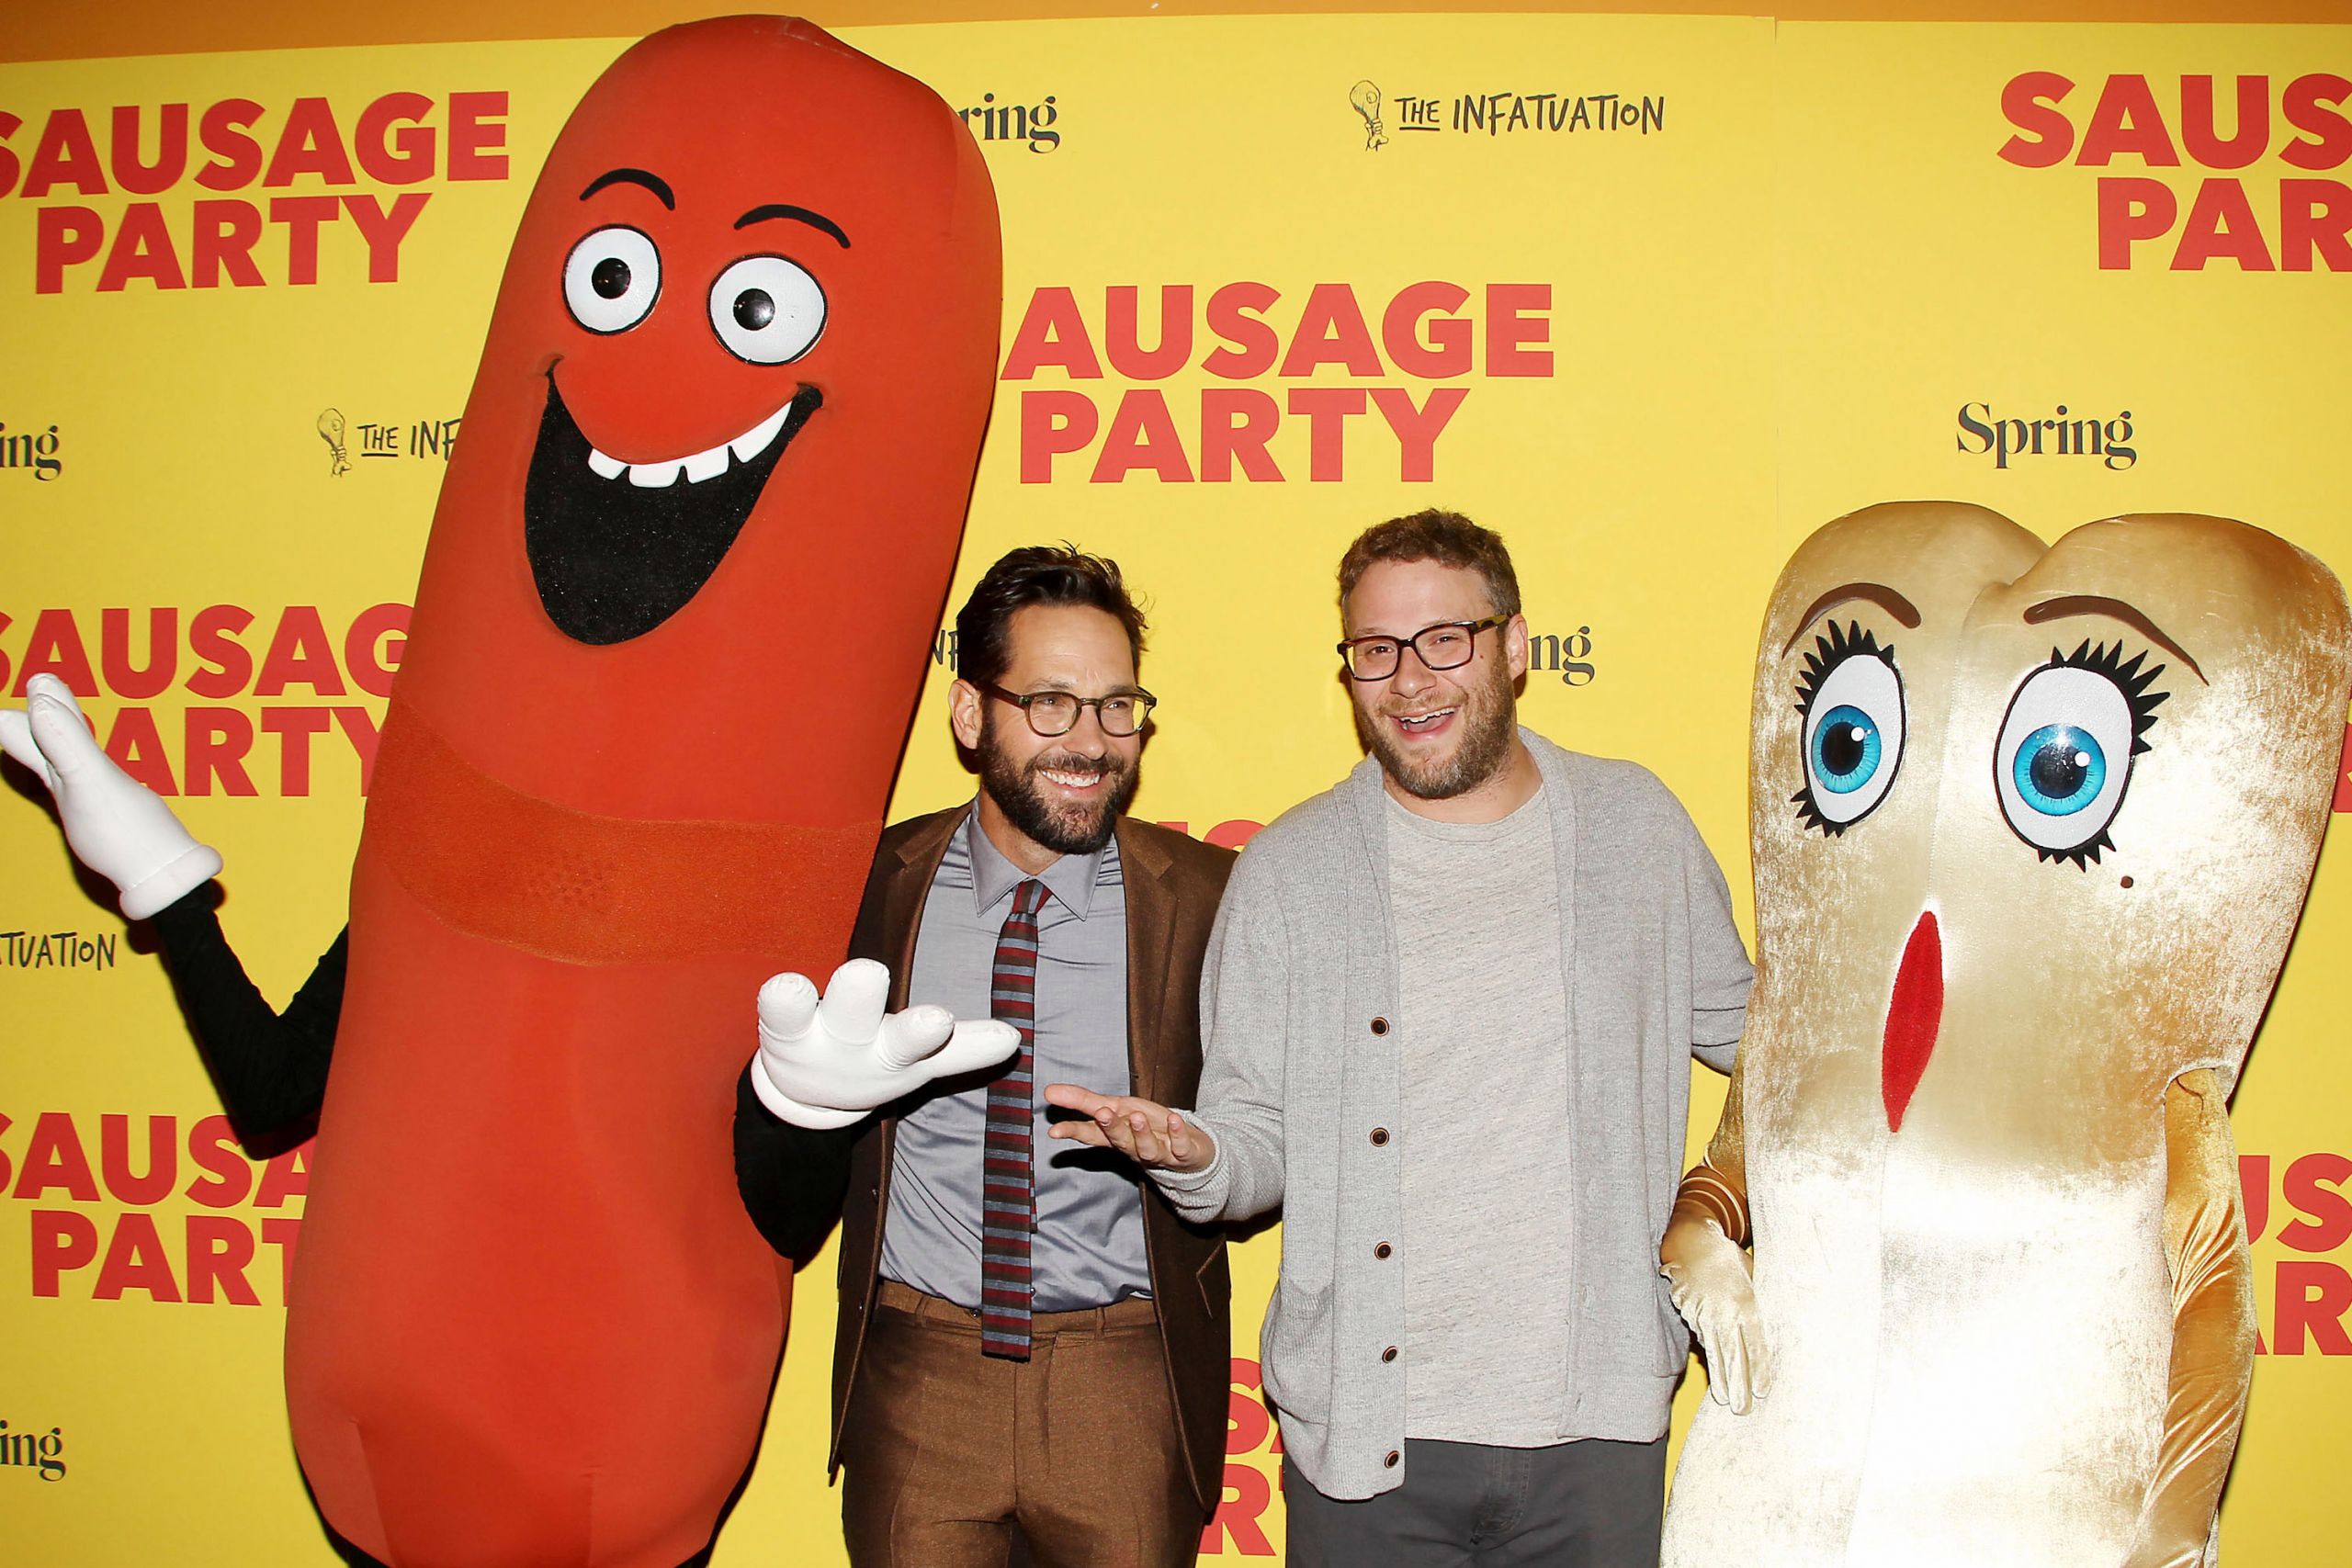 Sausage Party Not For Kids
 Seth Rogen advises kids not to see Sausage Party